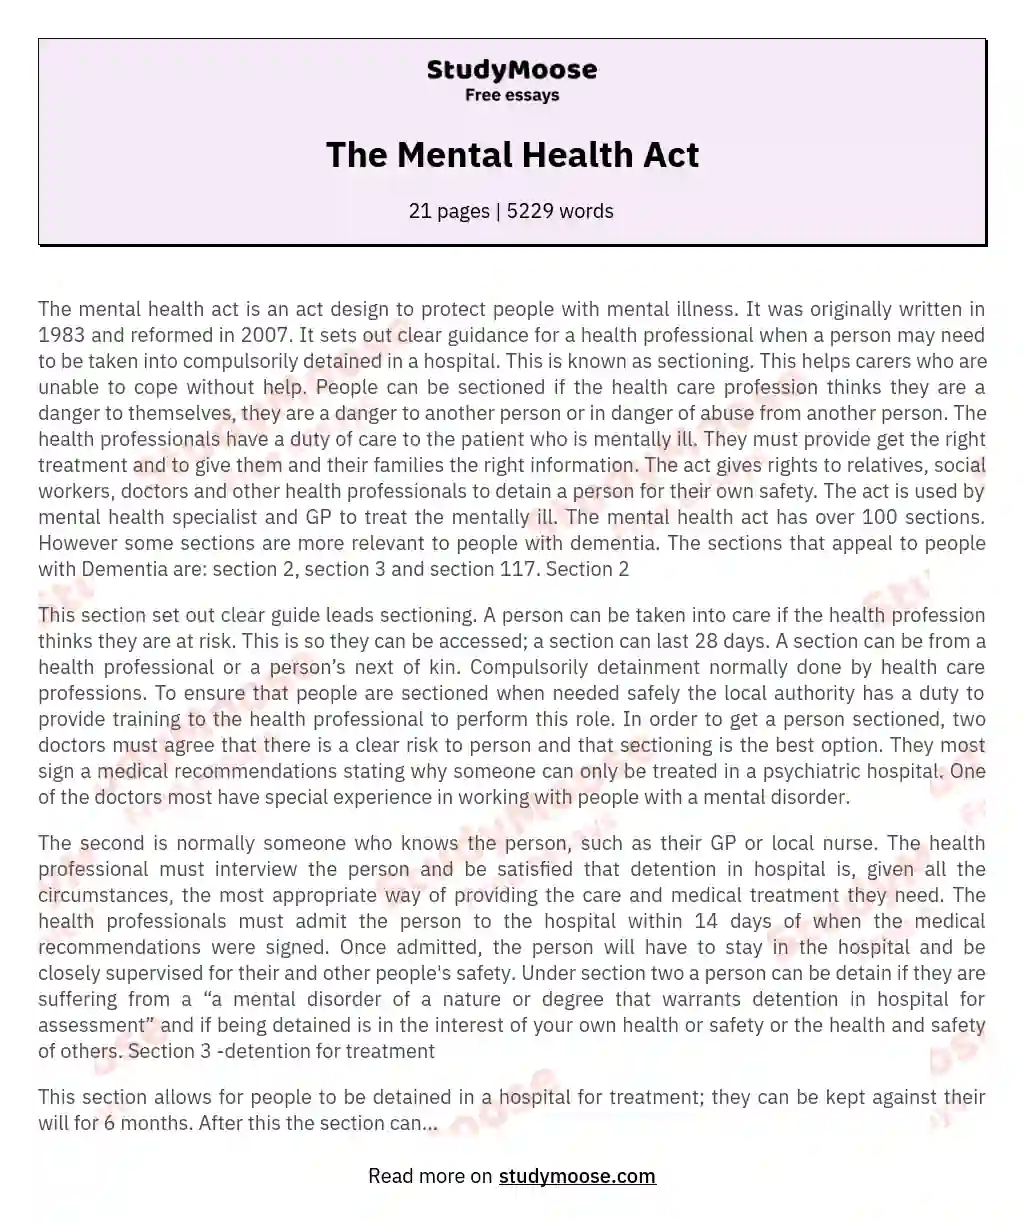 The Mental Health Act essay